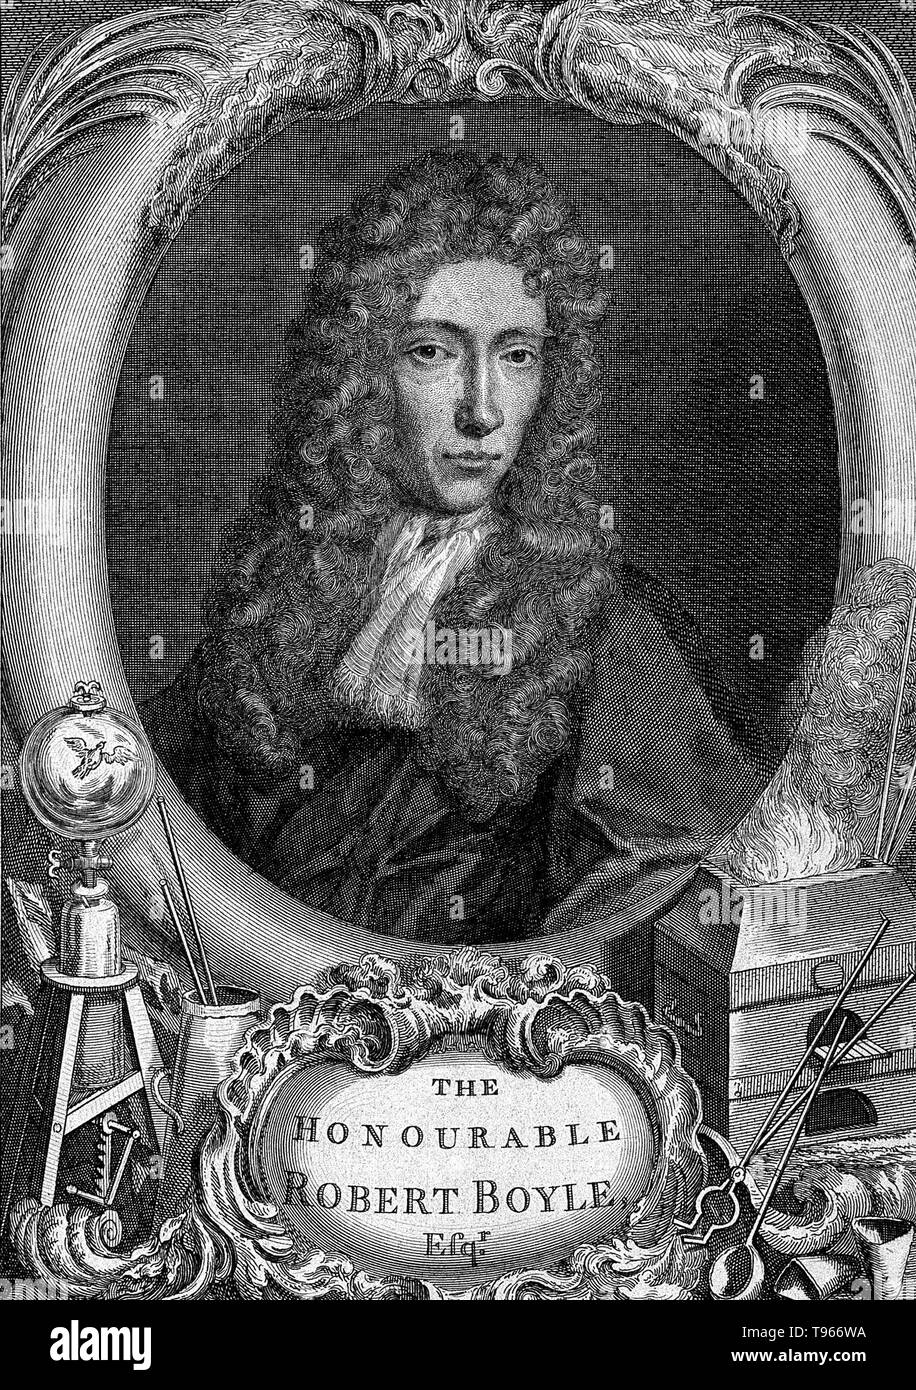 Robert Boyle (January 25, 1627 - December 31, 1691) was an Irish natural philosopher, chemist, physicist and inventor. He is regarded today as the first modern chemist, and one of the pioneers of modern experimental scientific method. He died in 1691 at the age of 64. Portrait by Frederic Kerseboom, undated. Stock Photo